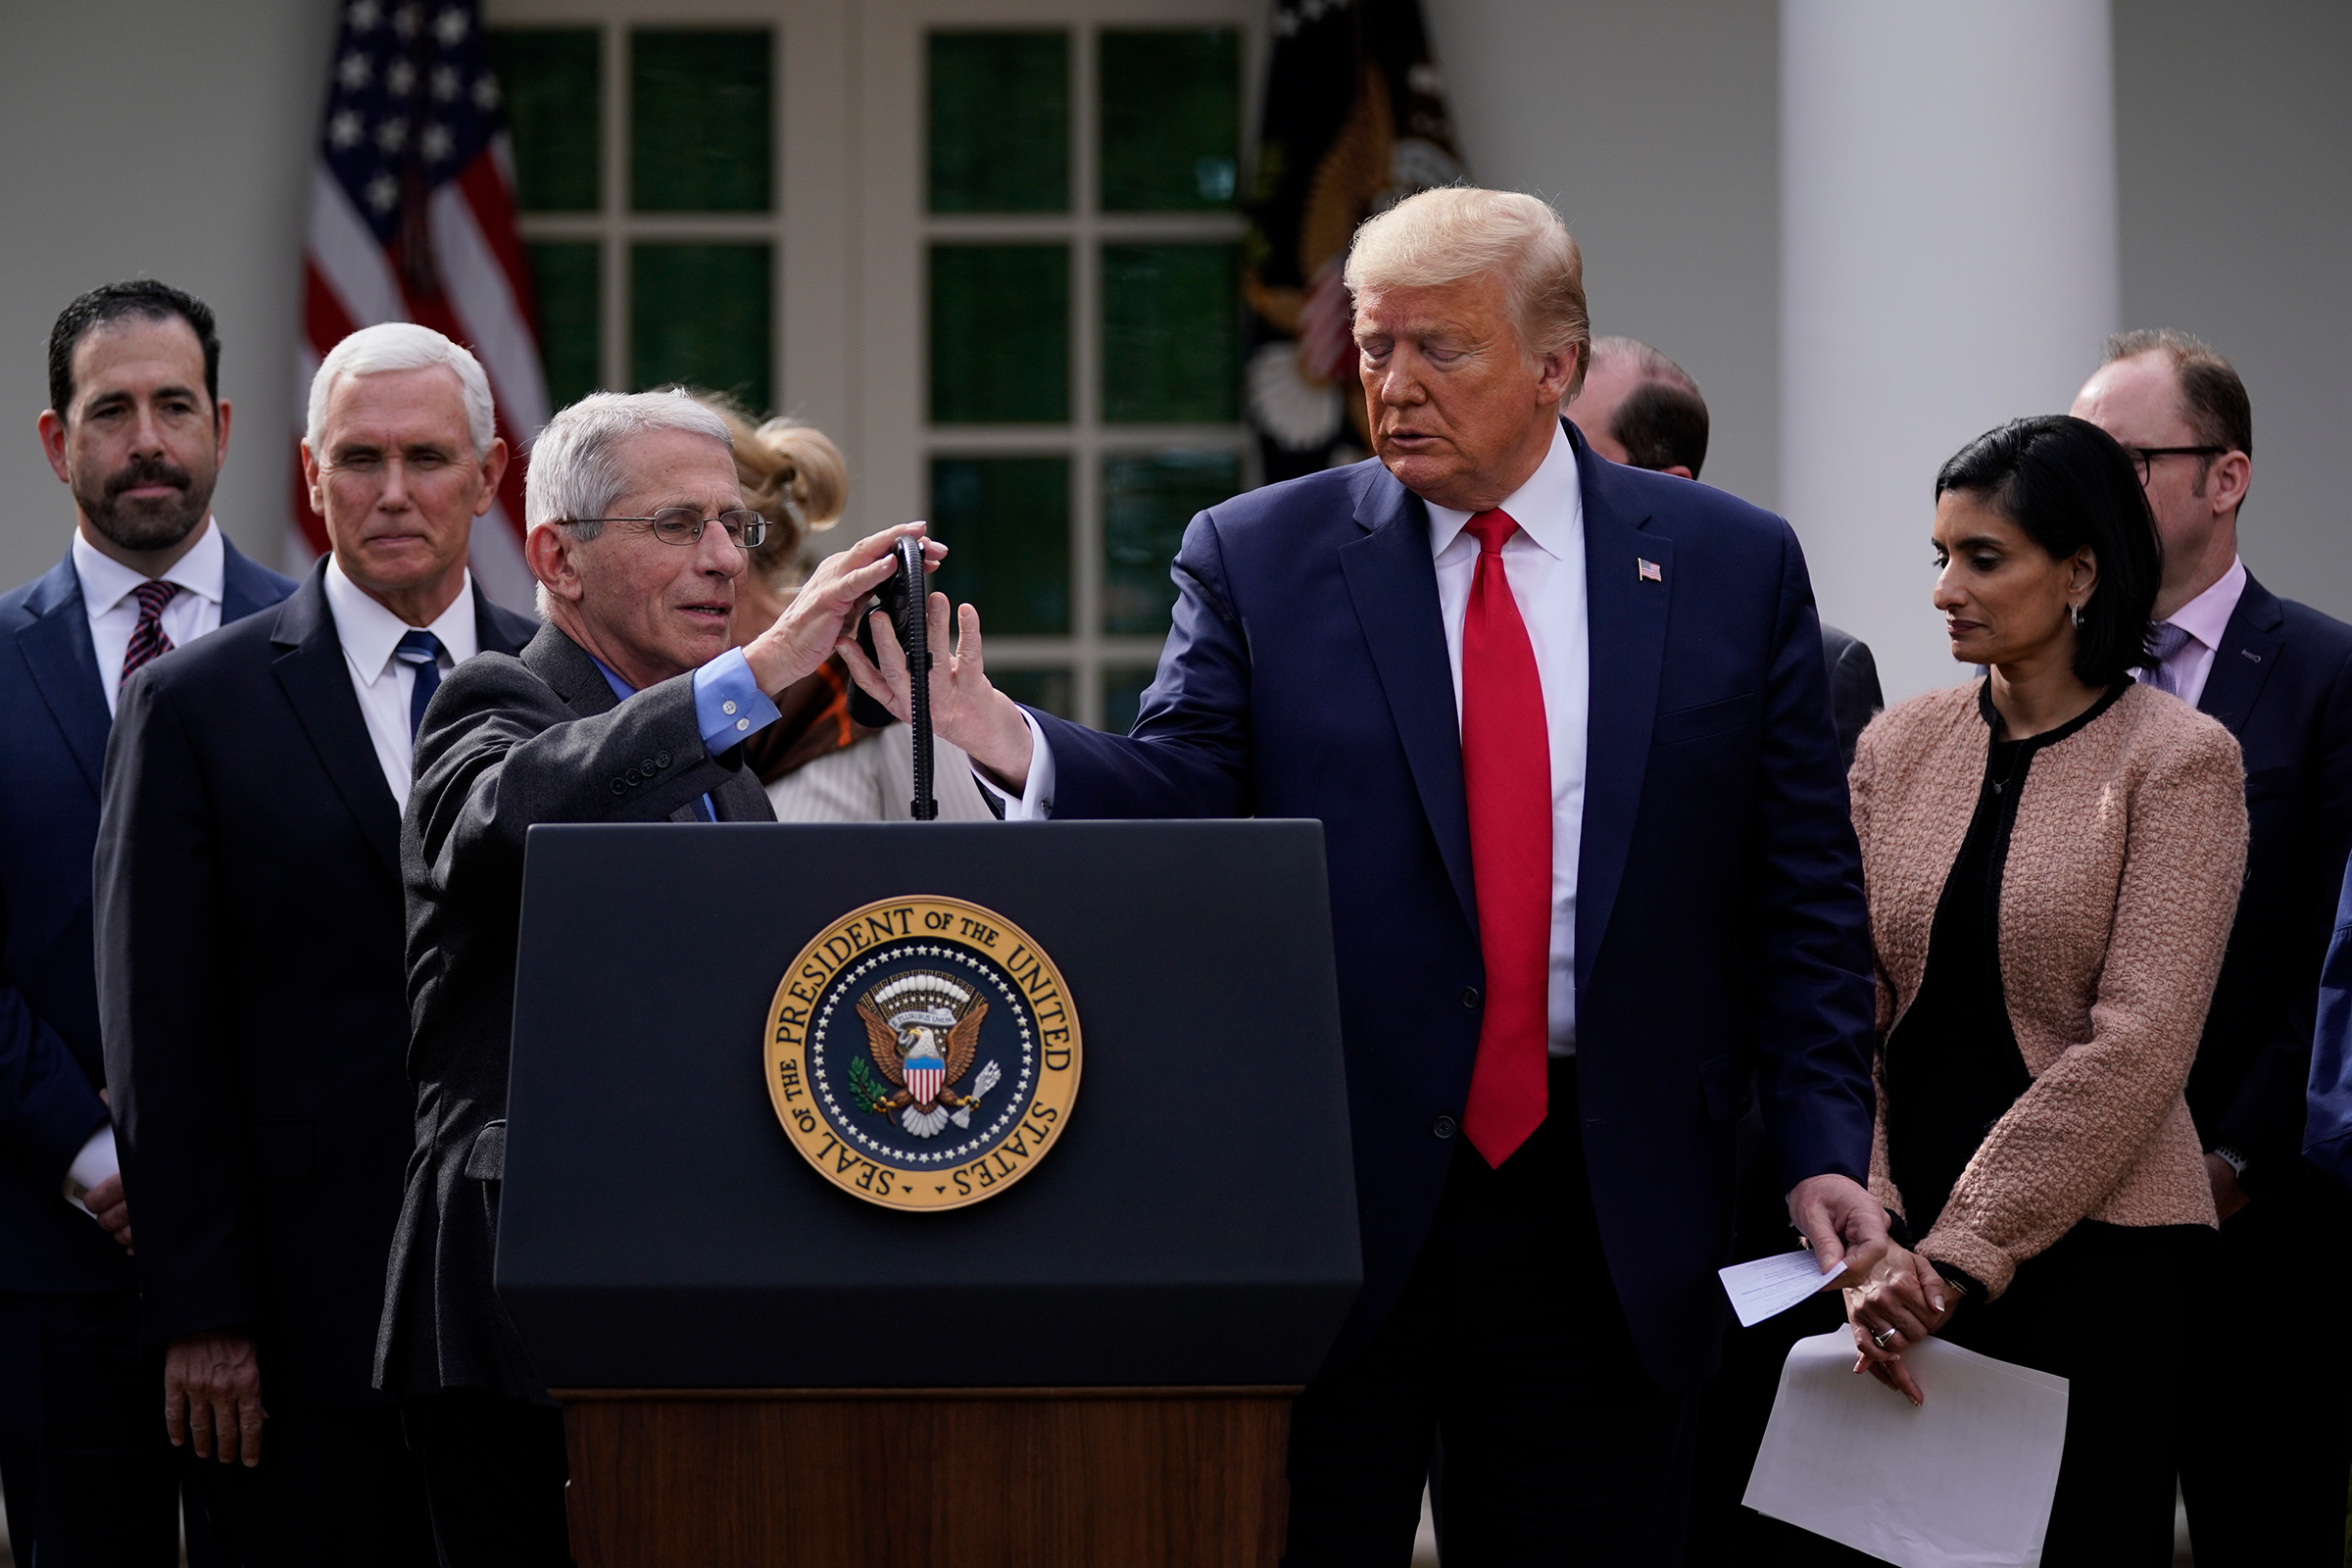 Trump and Fauci, at microphone, address reporters in the Rose Garden on March 13 (Evan Vucci—AP)